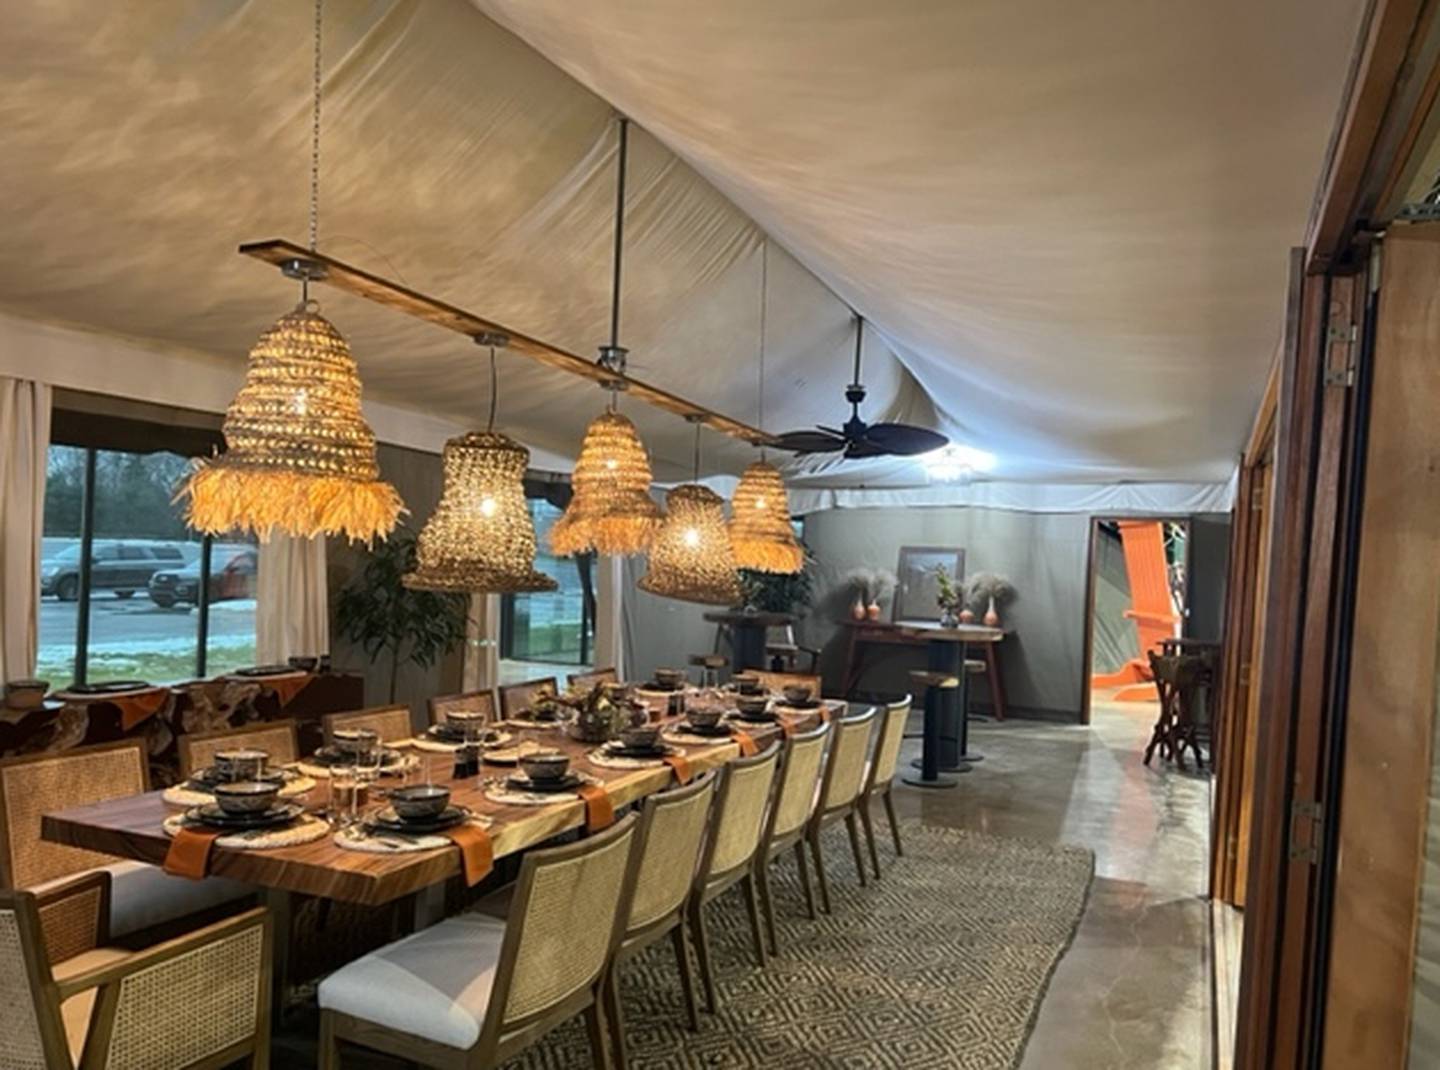 Safari-style glamping tents will be available for rent at Fox Bluff, an RV resort and vacation cabin at 8045 Van Emmon Road, formerly Hide-A-Way Lakes.  (photo provided)